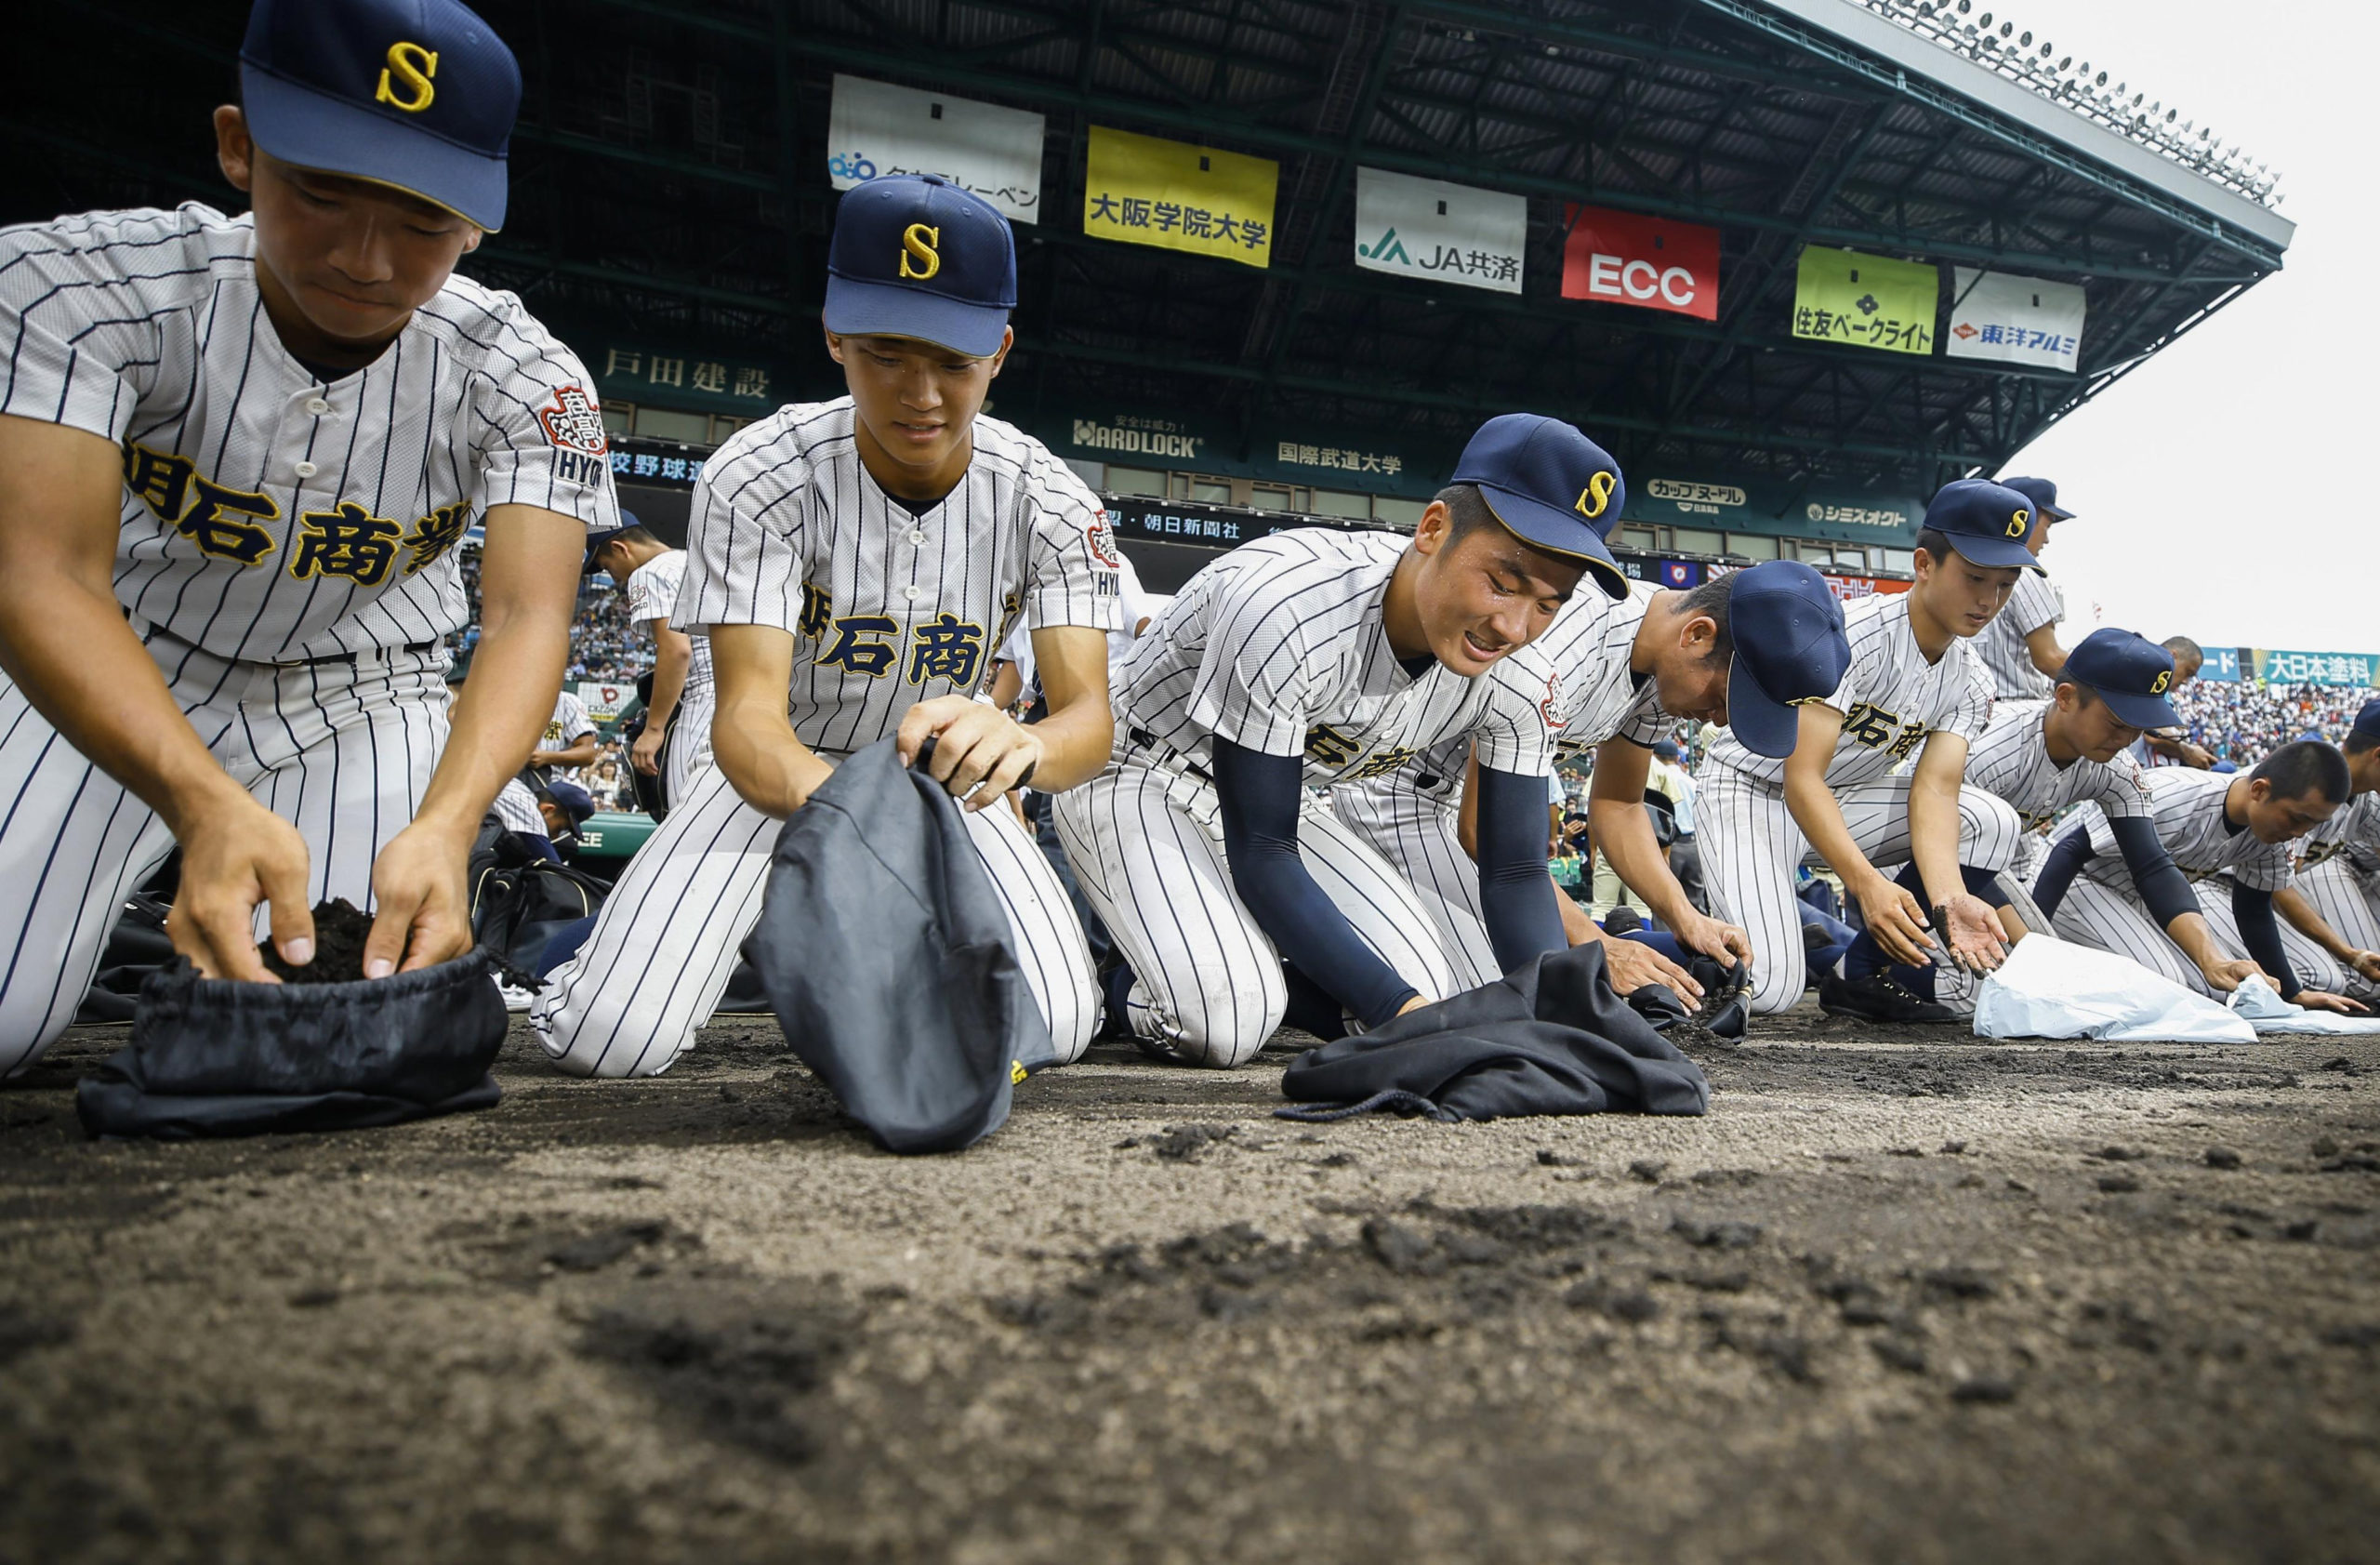 Young baseball players get memento filled with stadium dirt - The